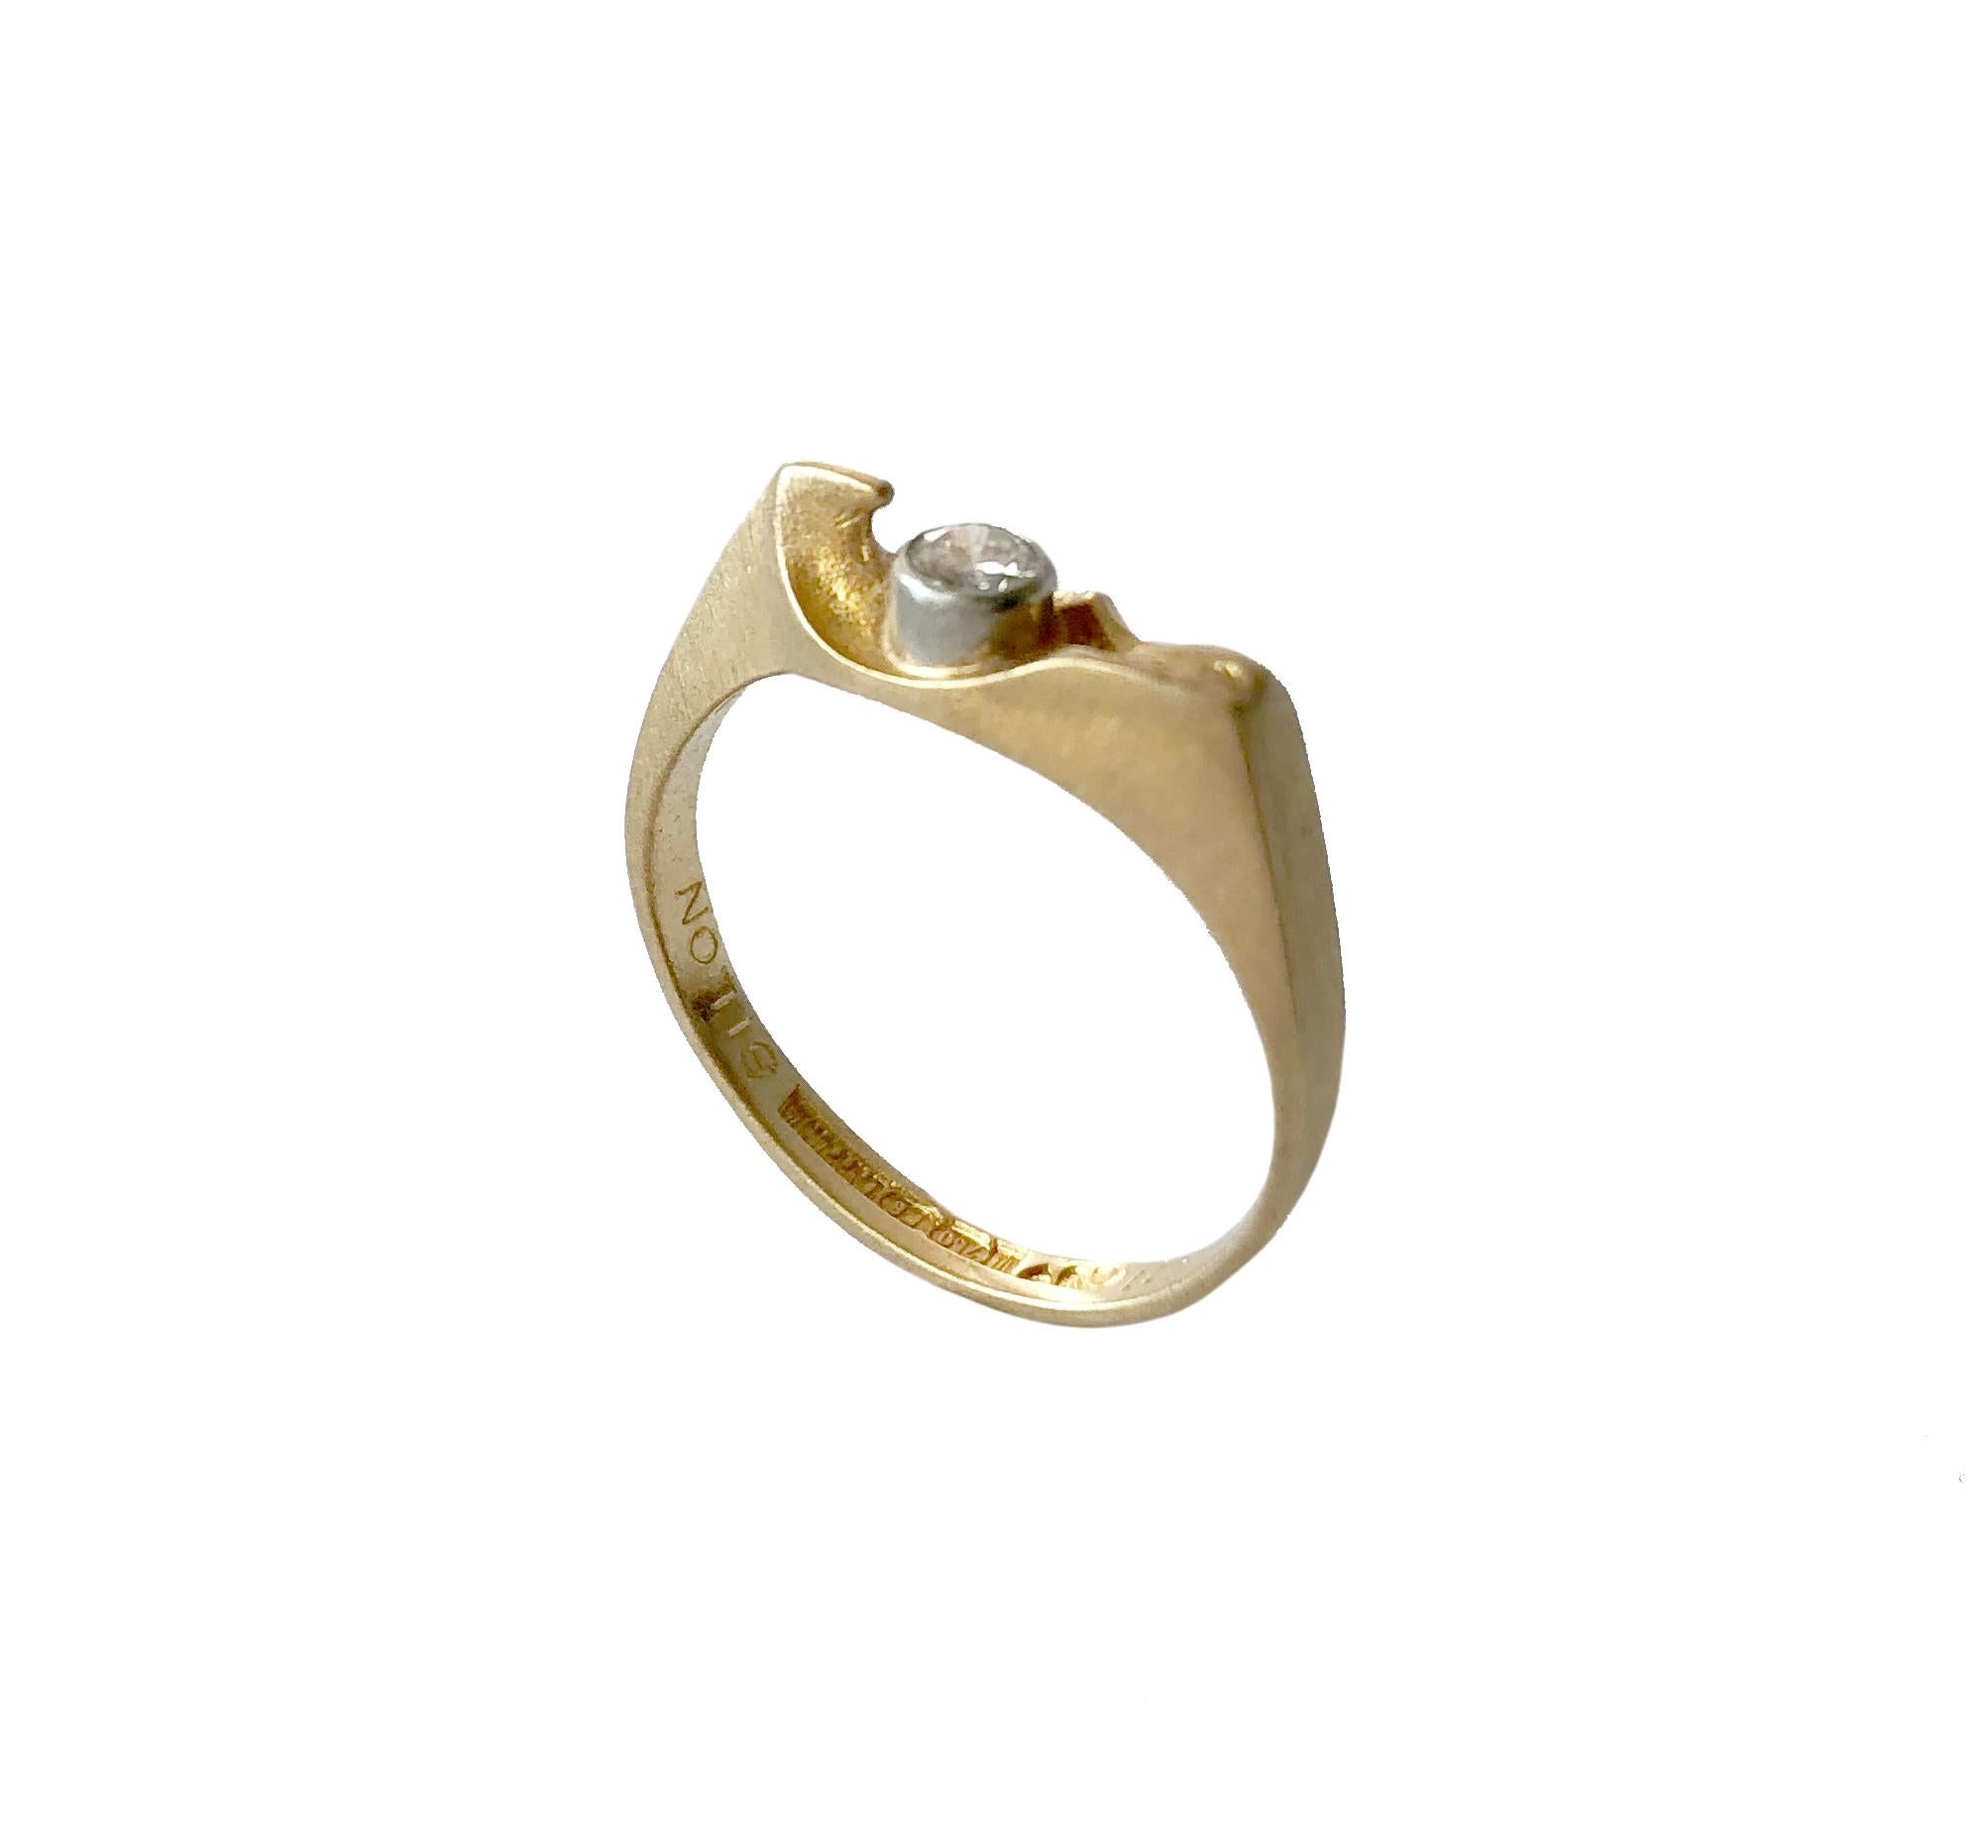 1980's Bjorn Weckstrom for Lapponia Finnish modernist ring of 18K satin gold with solitaire diamond set in platinum bezel. Ring is a finger size 6 and signed F8 (1983), Lapponia, 750.  A modern alternative to a traditional engagement or wedding